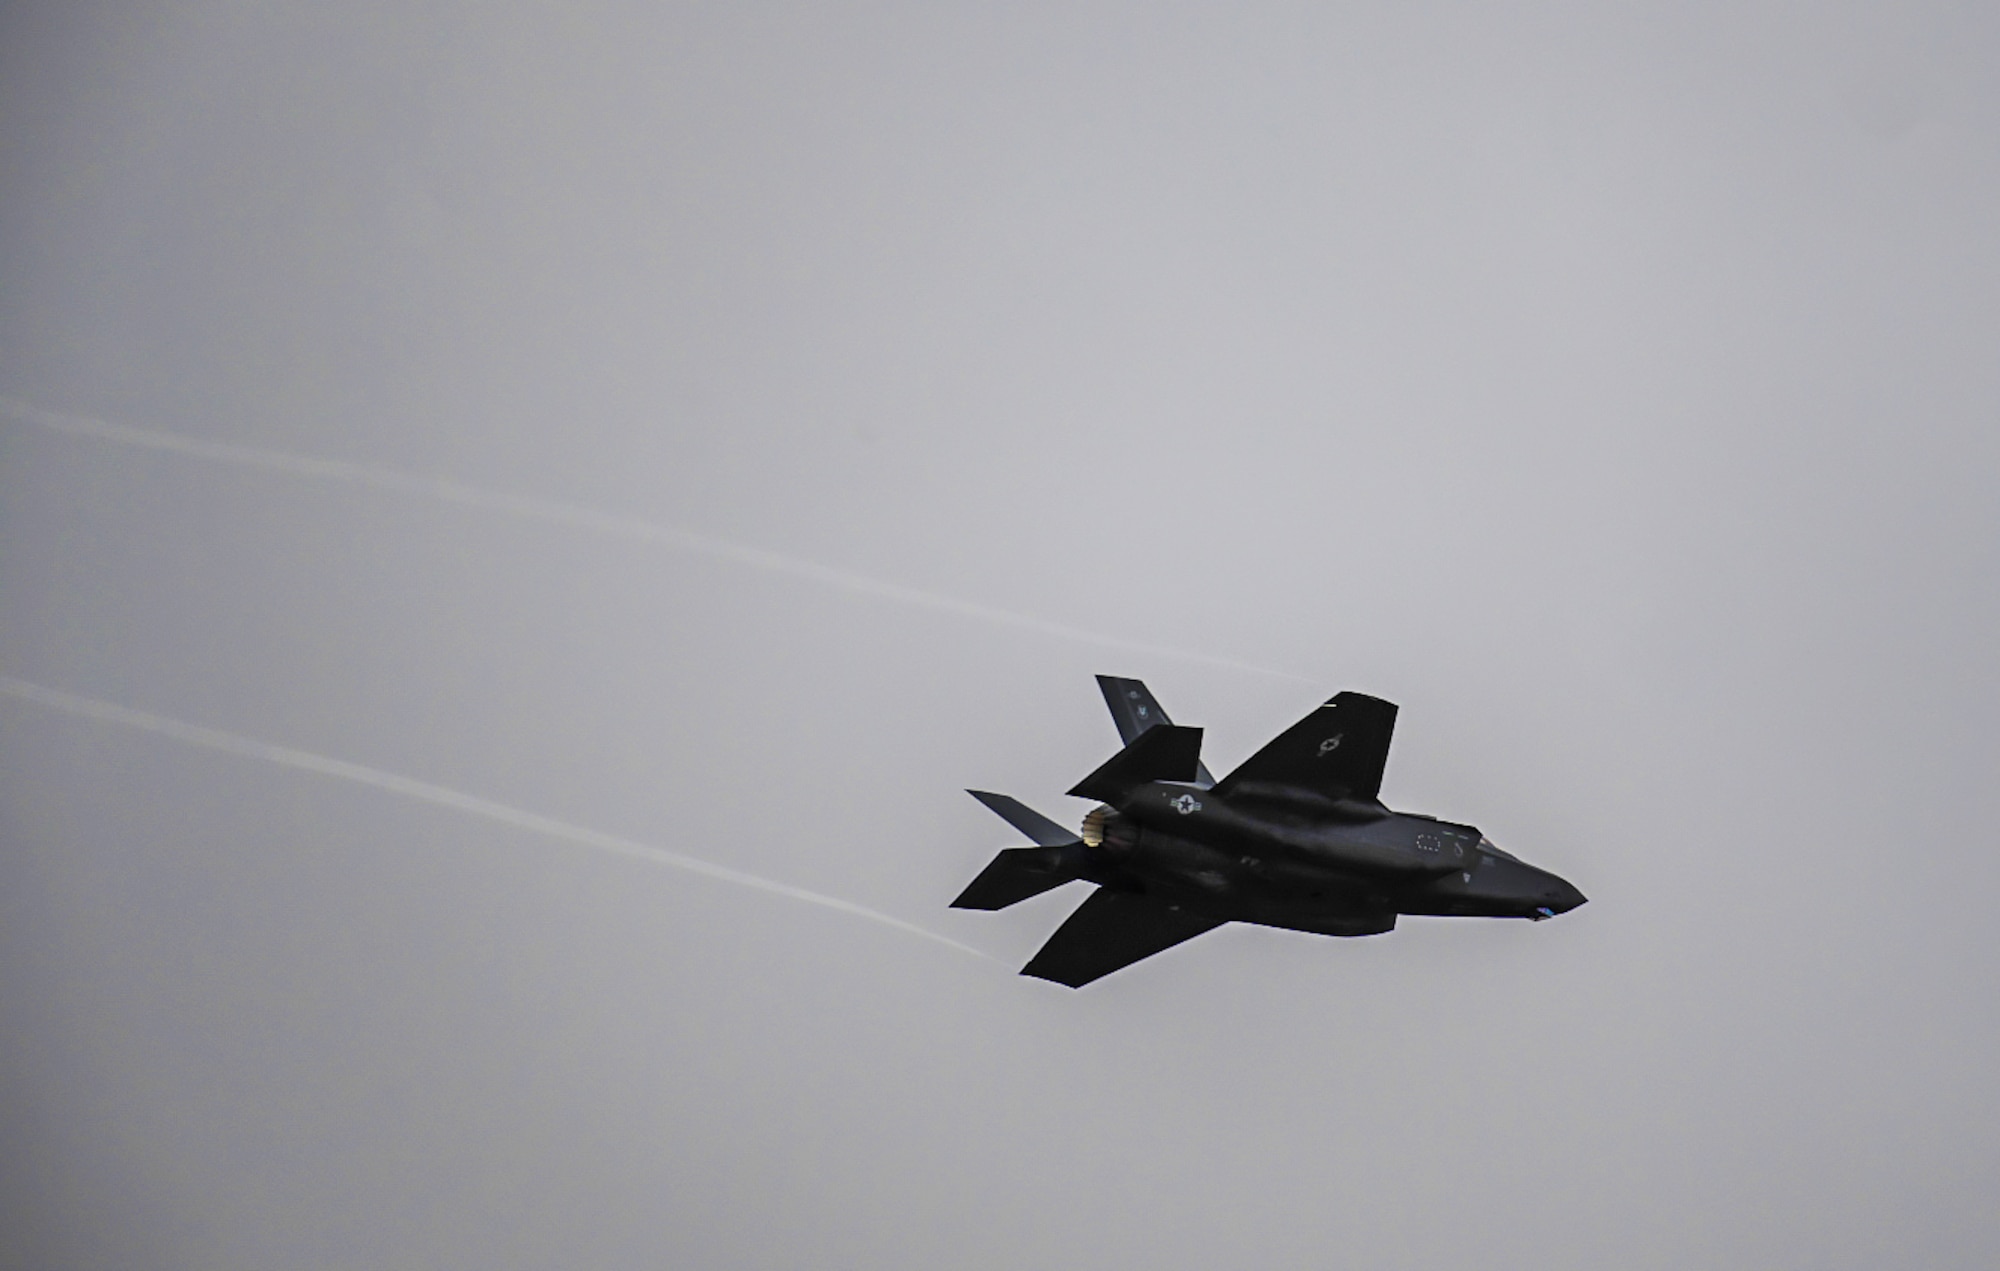 An F-35 Lightning II from Hill Air Force Base, Utah, flies over the flight line at Mountain Home AFB, Idaho, April 28, 2021. The F-35 participated in exercise Rainier War, testing its abilities to employ air combat capabilities during a time of potentially imminent foreign aggression. (U.S. Air Force photo by Staff Sgt. Christian Conrad)